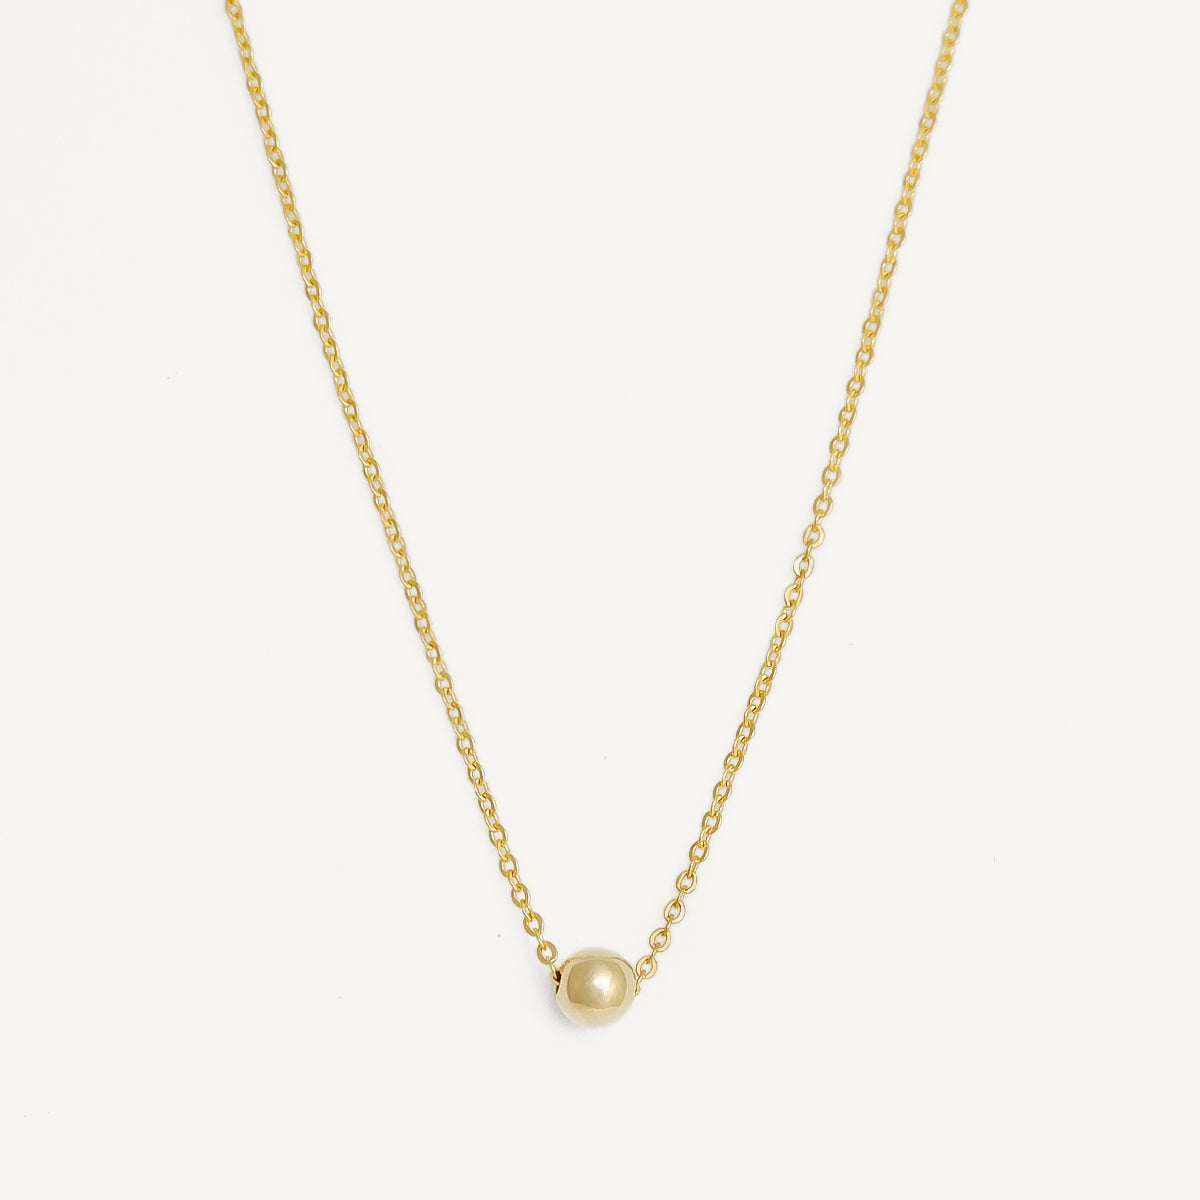 The Classic Ball Necklace